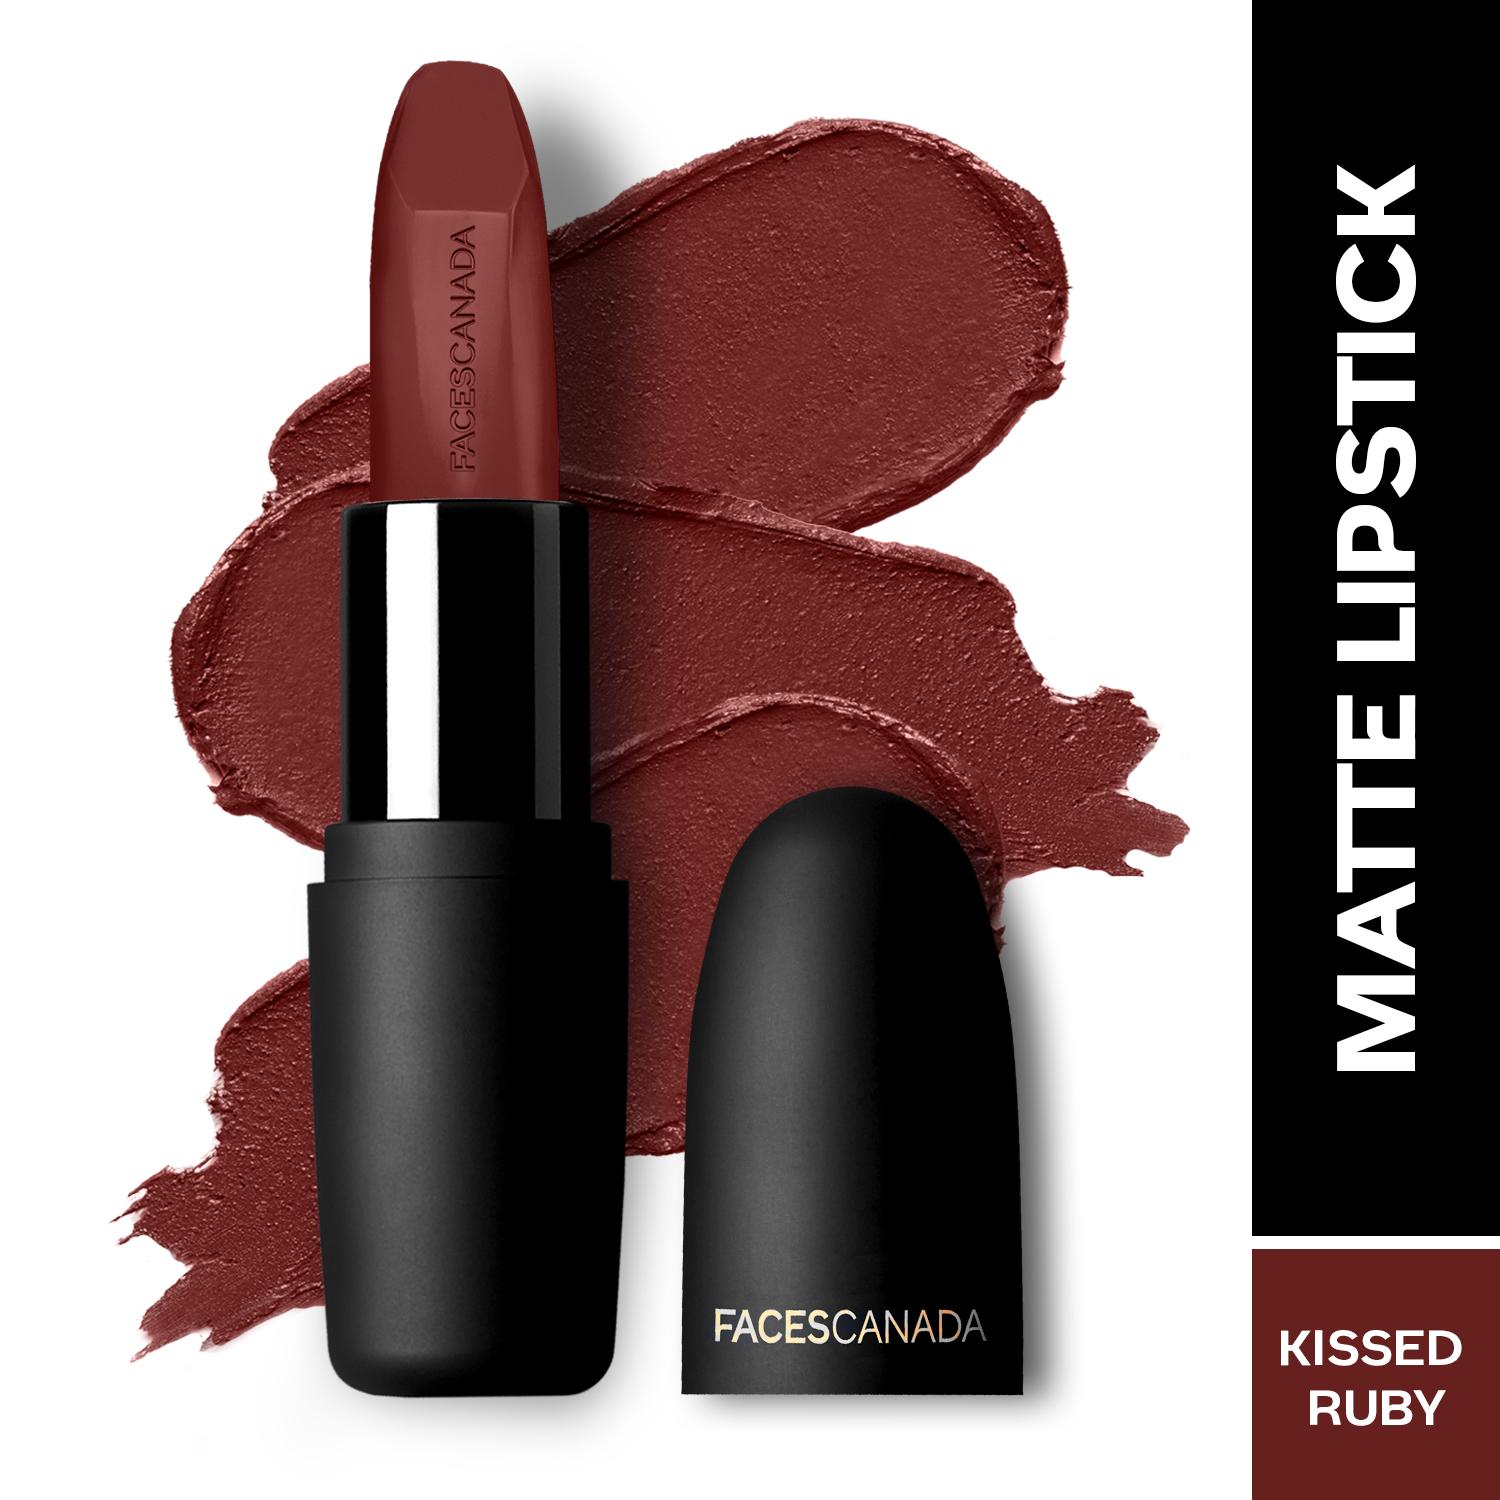 Faces Canada | Faces Canada Weightless Matte Lipstick, Pigmented and Hydrated Lips - Kissed Ruby 13 (4.5 g)